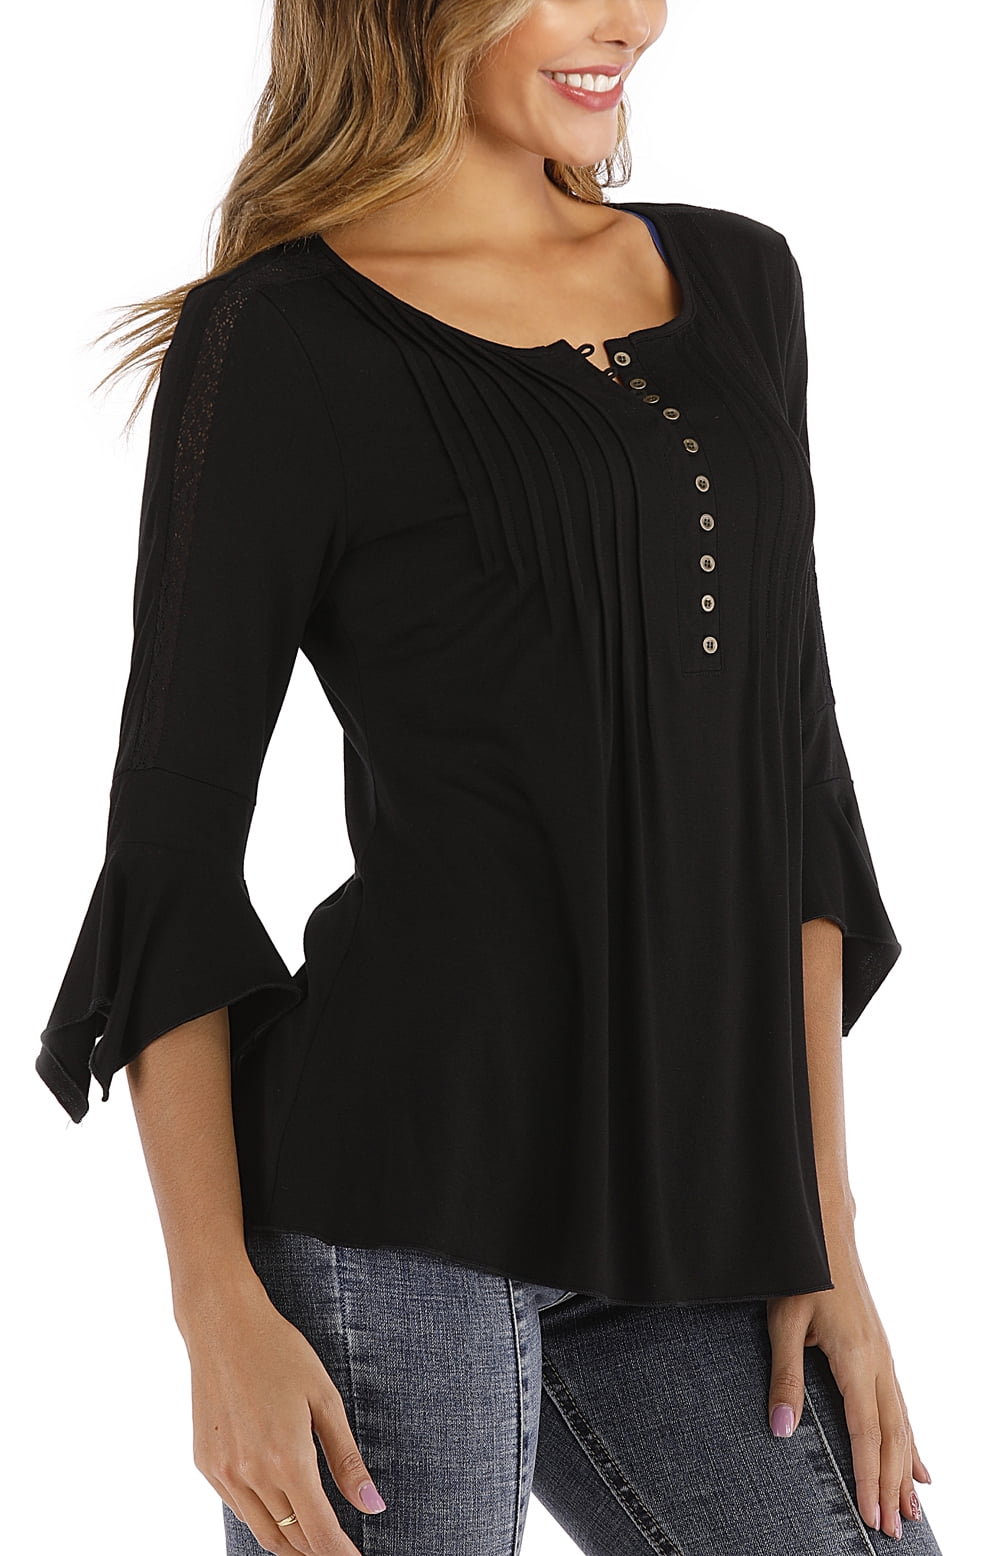 MISS MOLY Womens Tunic Tops Henly Lace 3/4 Bell Sleeve Blouse